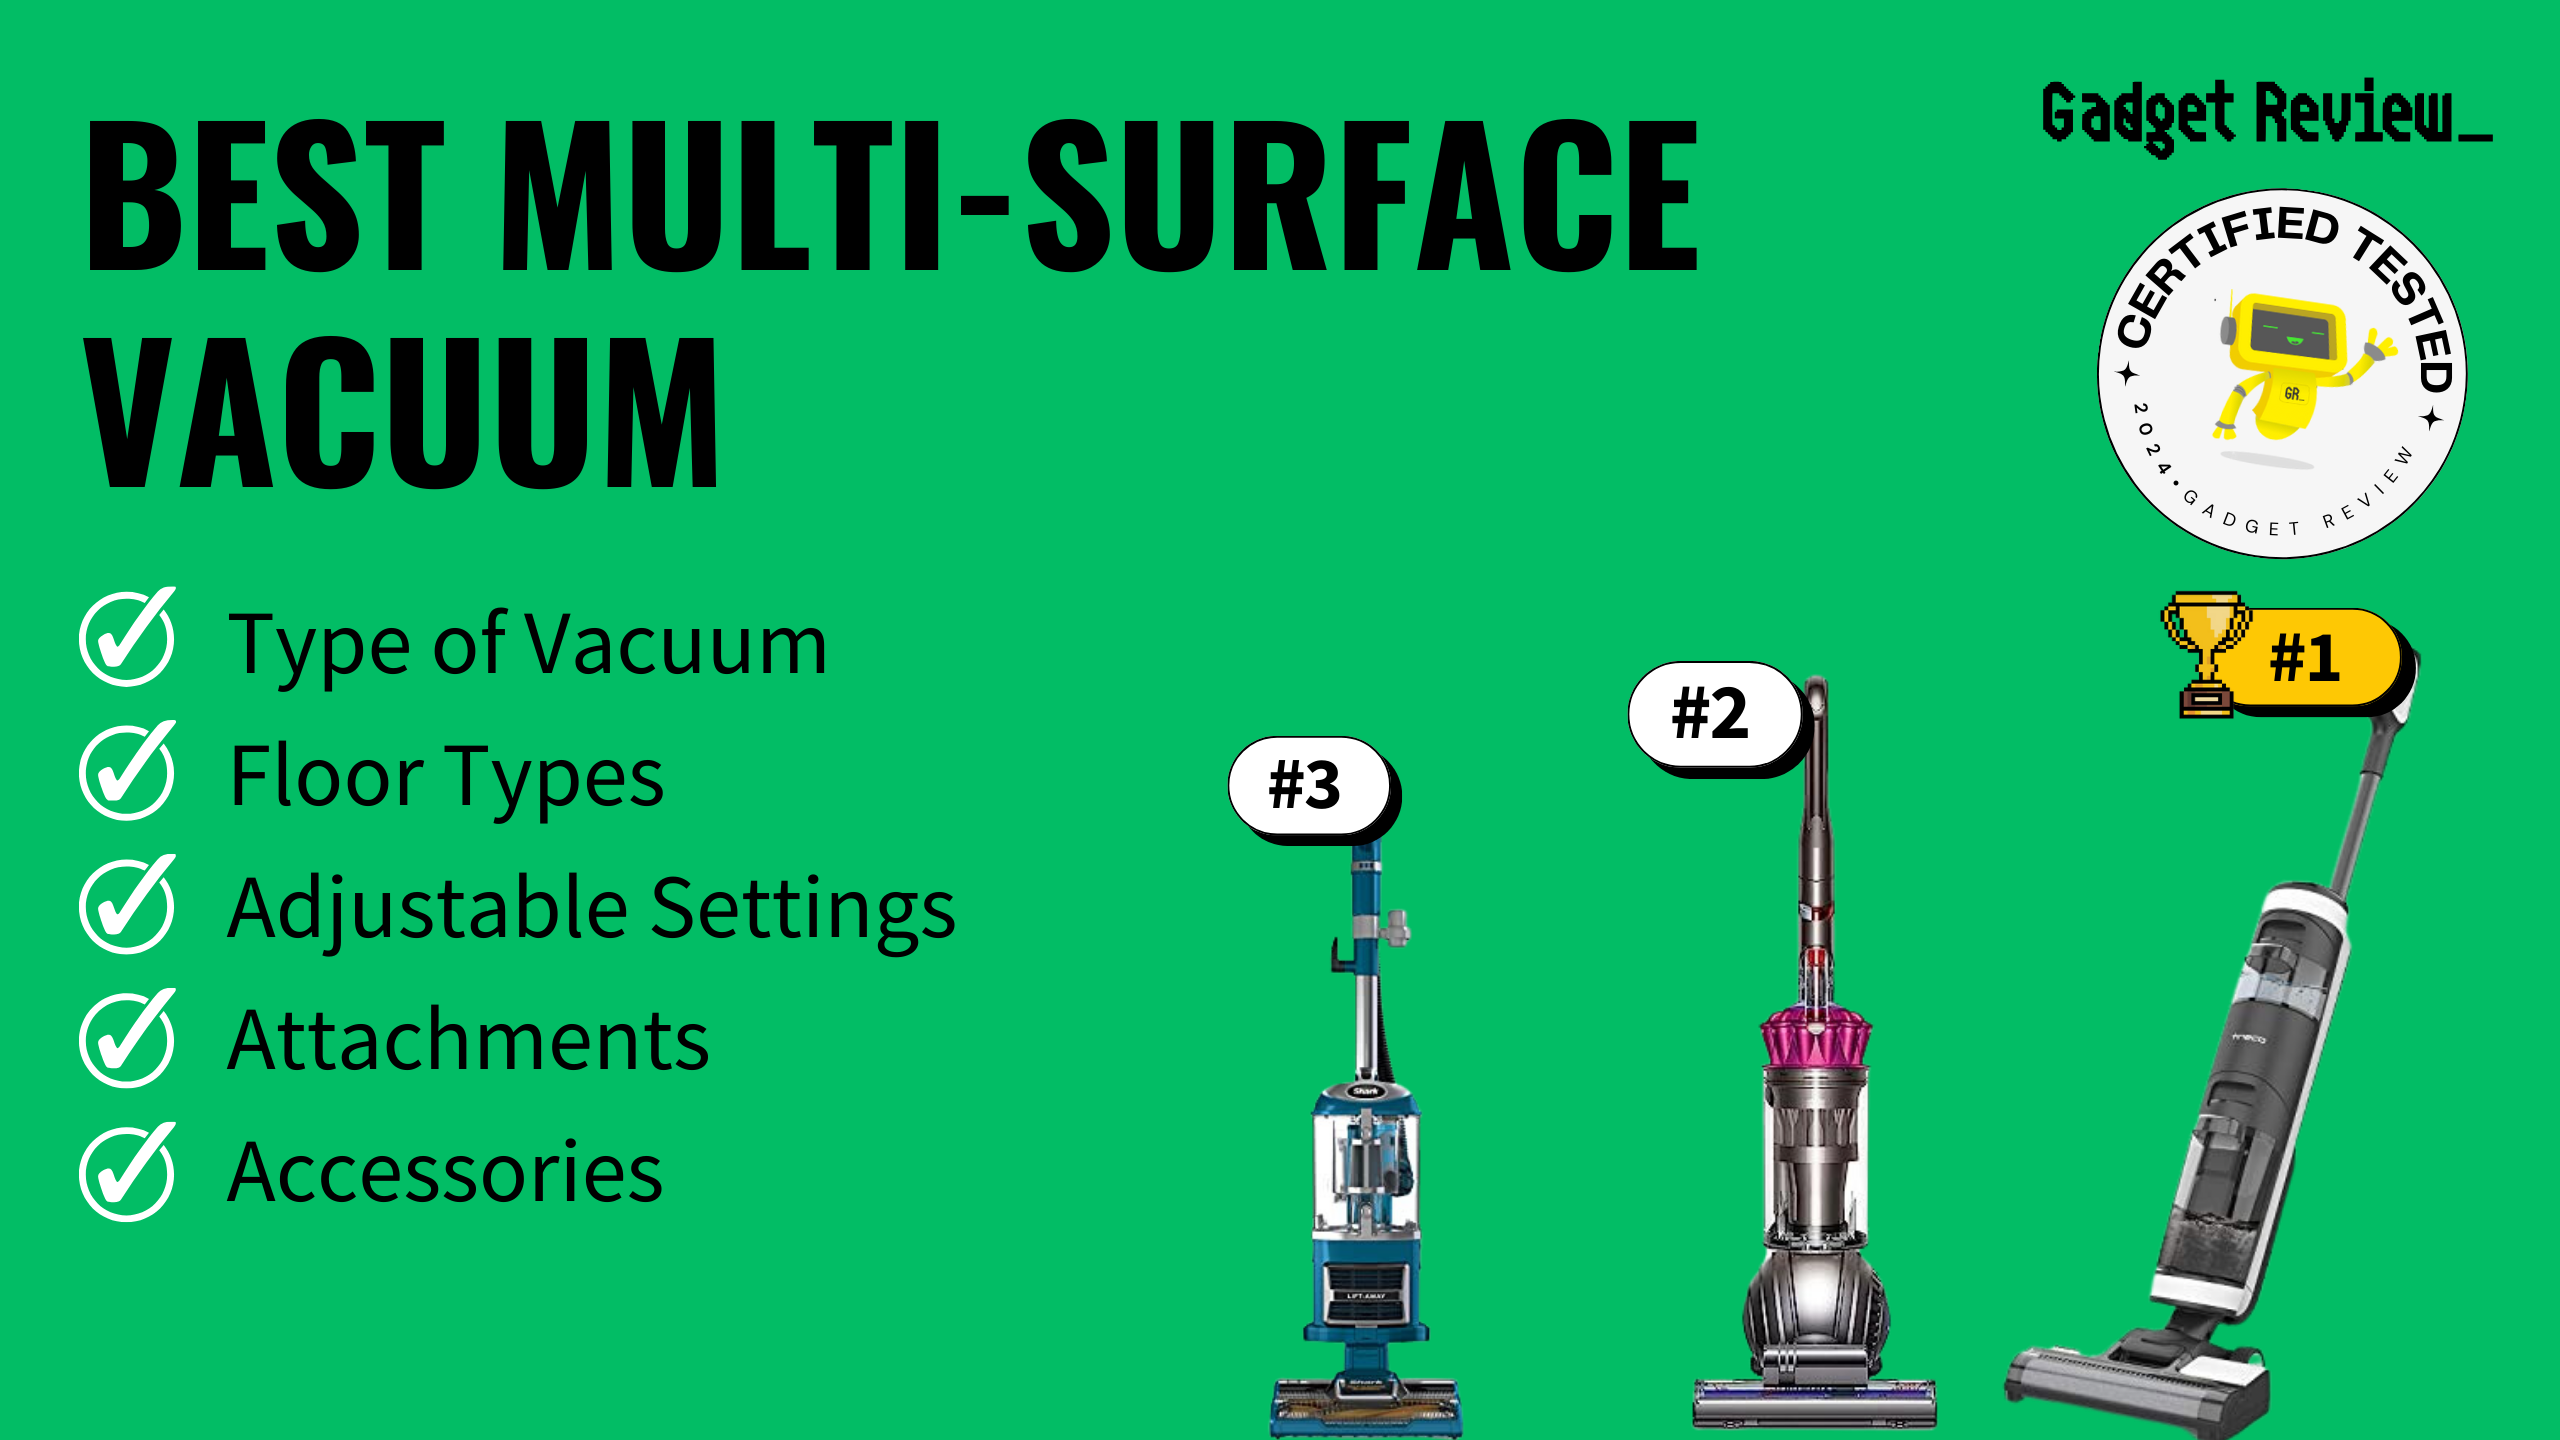 best multi surface vacuum guide that shows the top best vacuum cleaner model